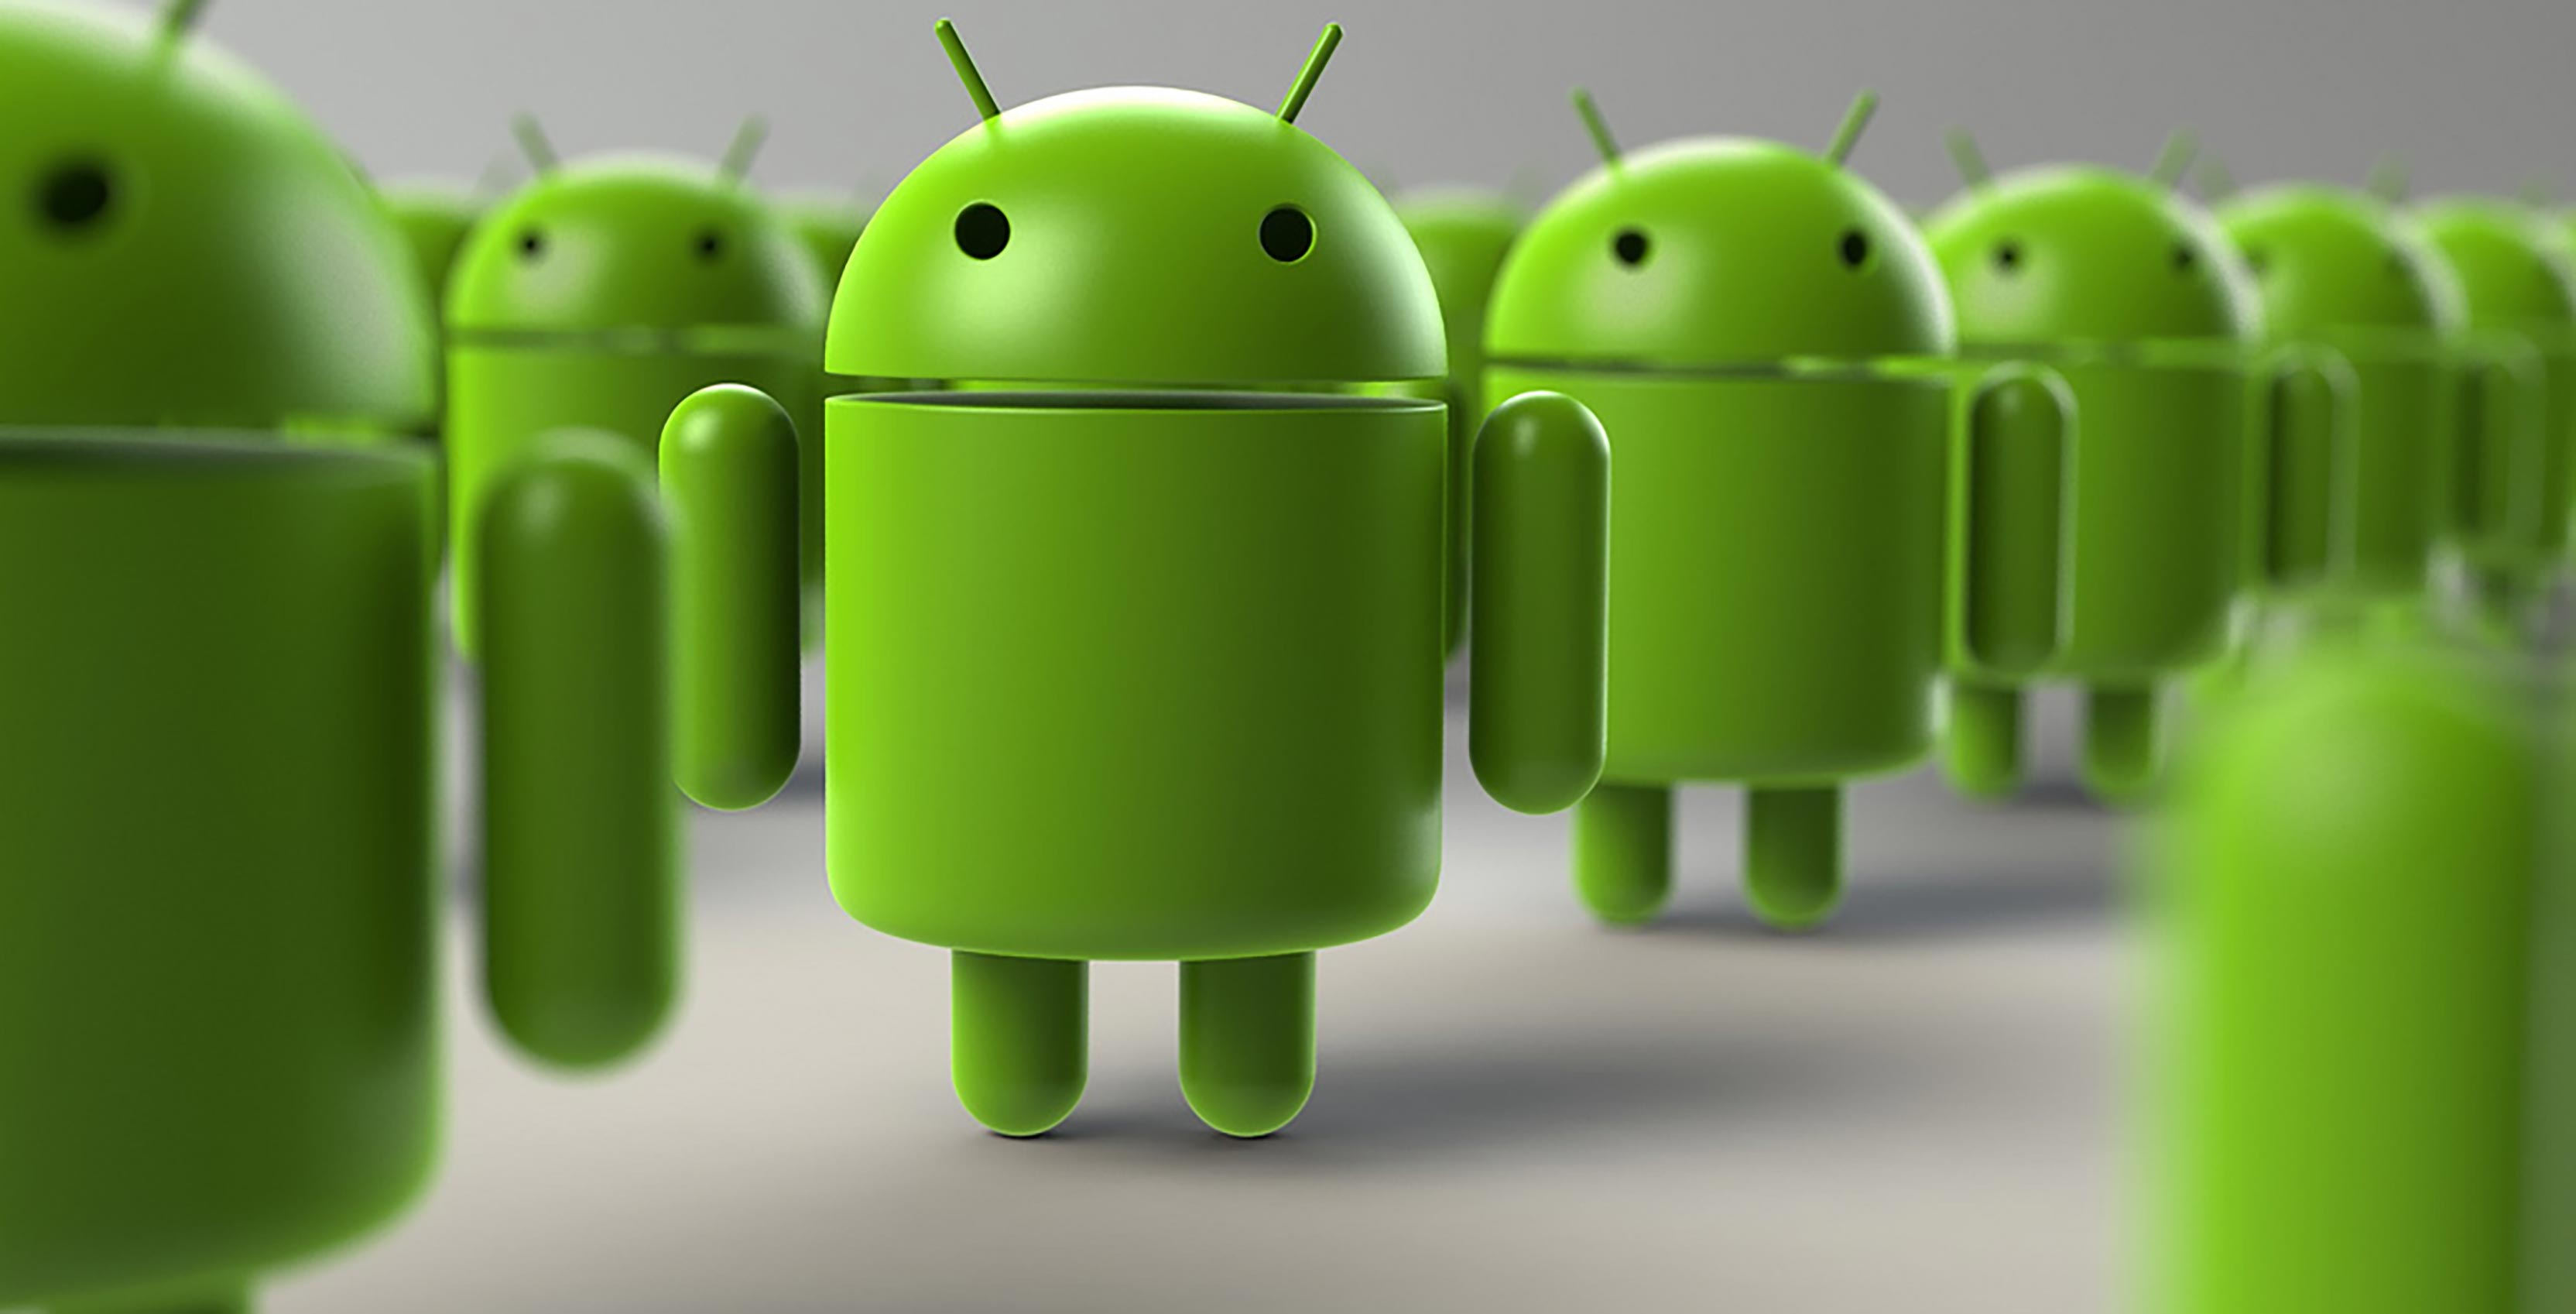 Massive Android vulnerability discovered, hackers can control your phone remotely